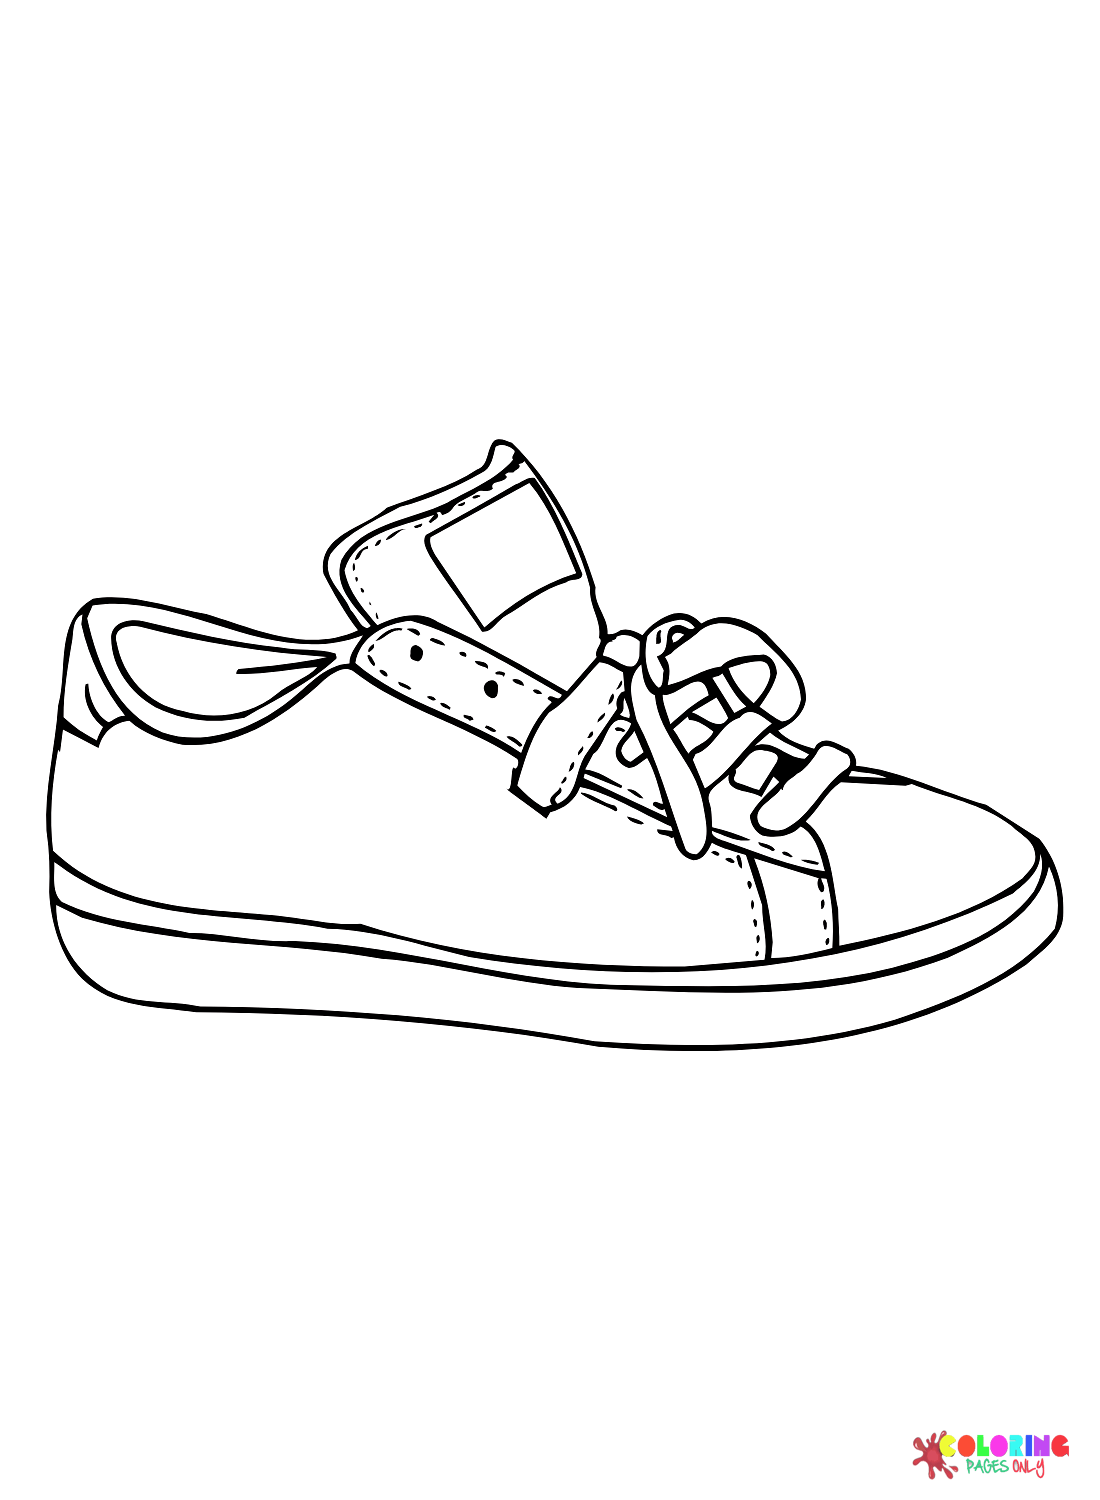 30 Free Printable Sneaker Coloring Pages